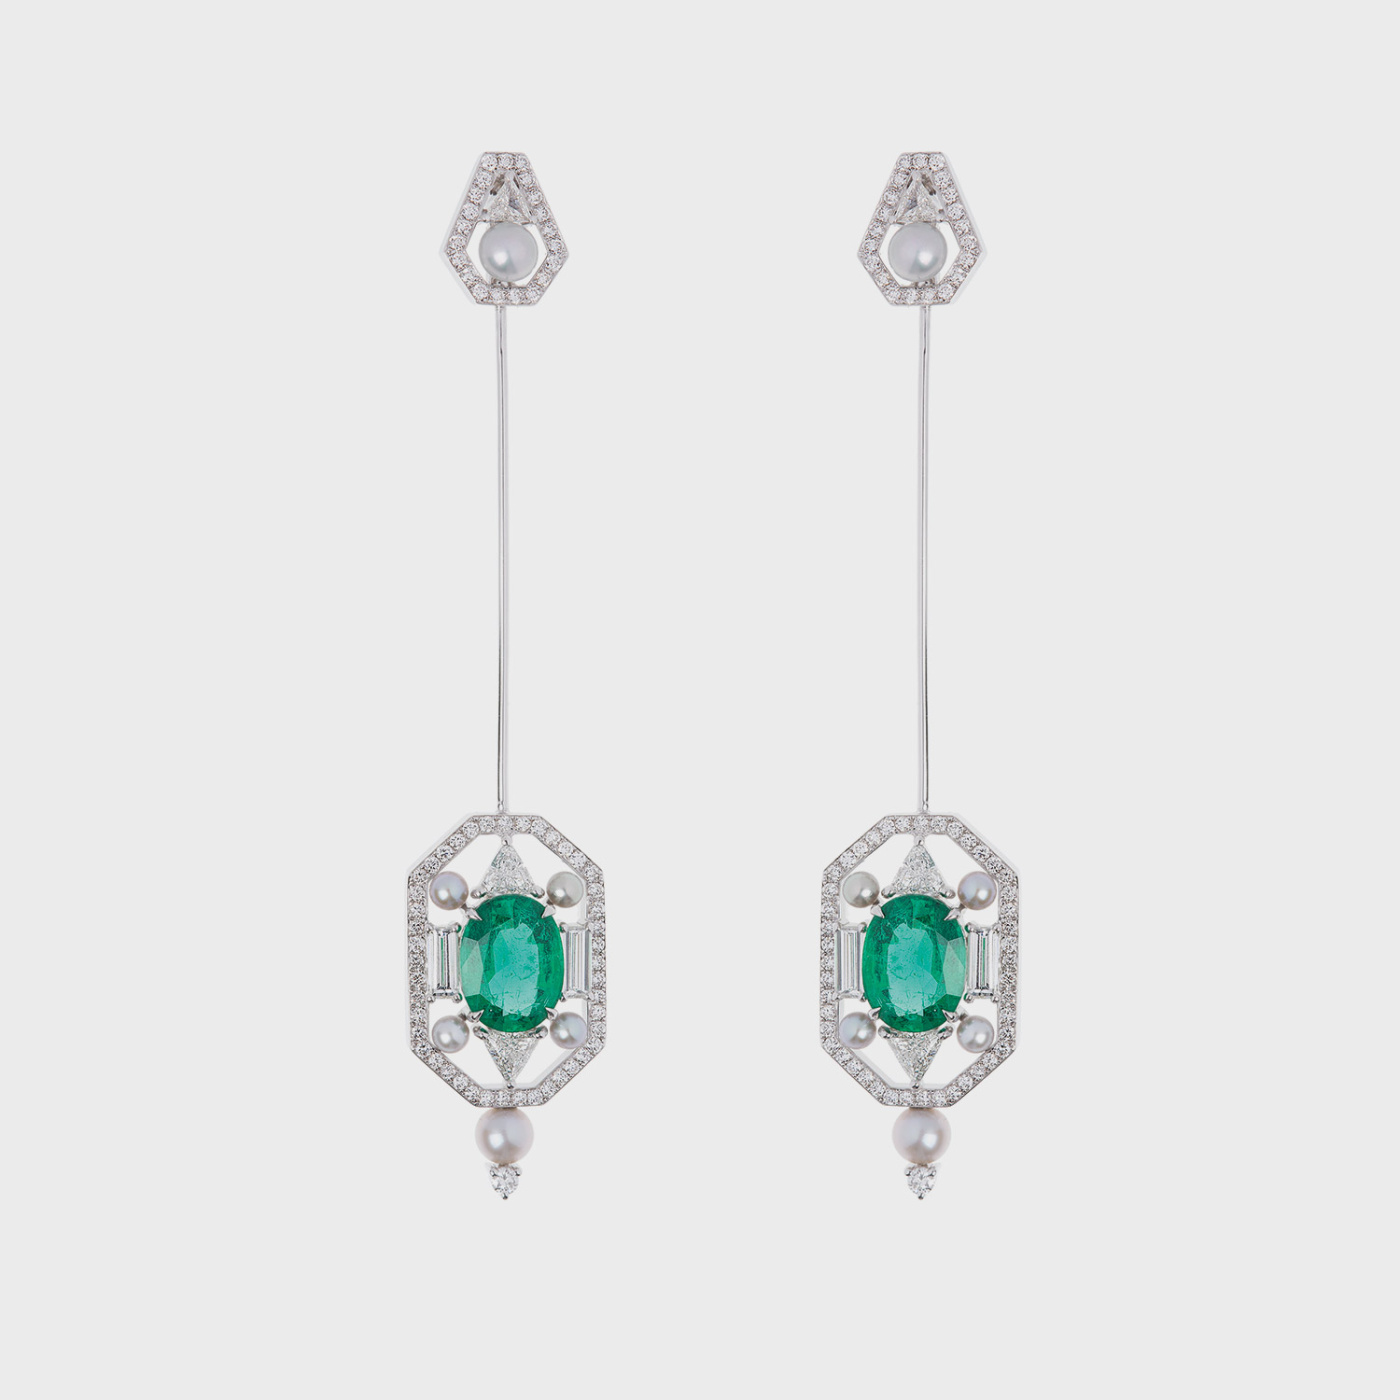 White gold long earrings / brooches with white diamonds, emeralds and silver pearls